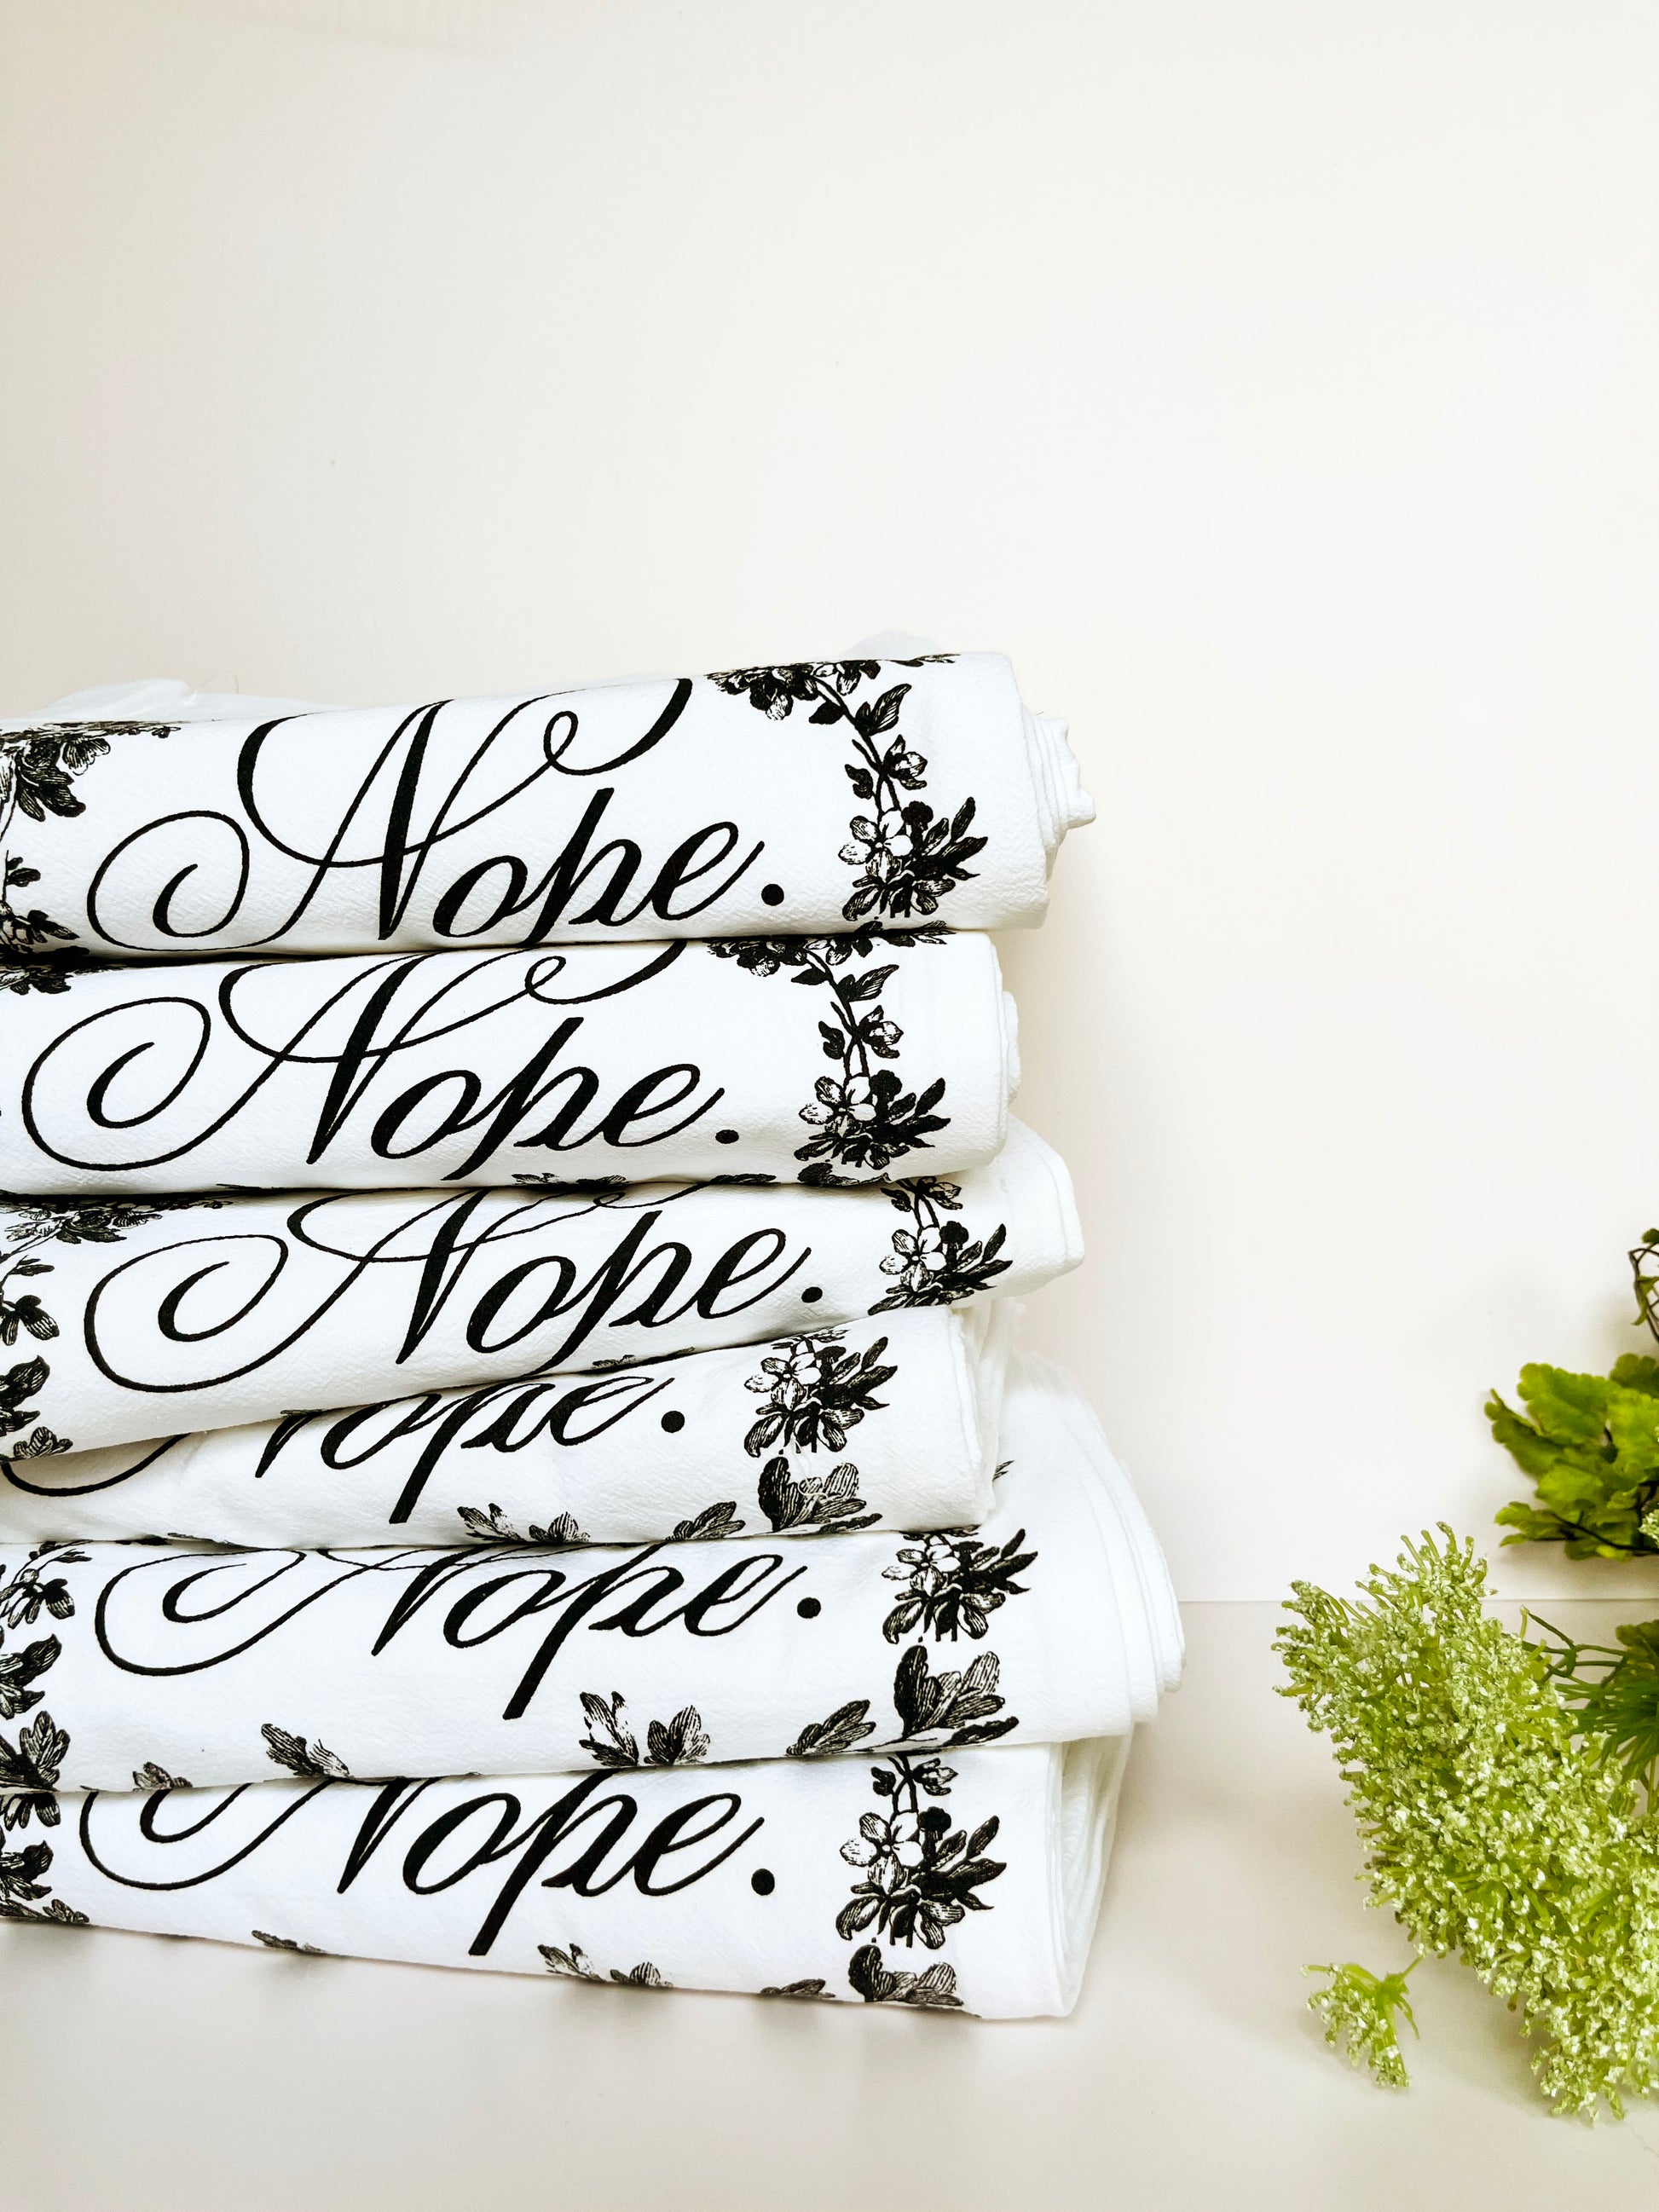 nope funny kitchen towel dish tea bar towel cotton reusable cloth coin laundry screen print printed flowers floral wreath vintage style decor kitsch fun